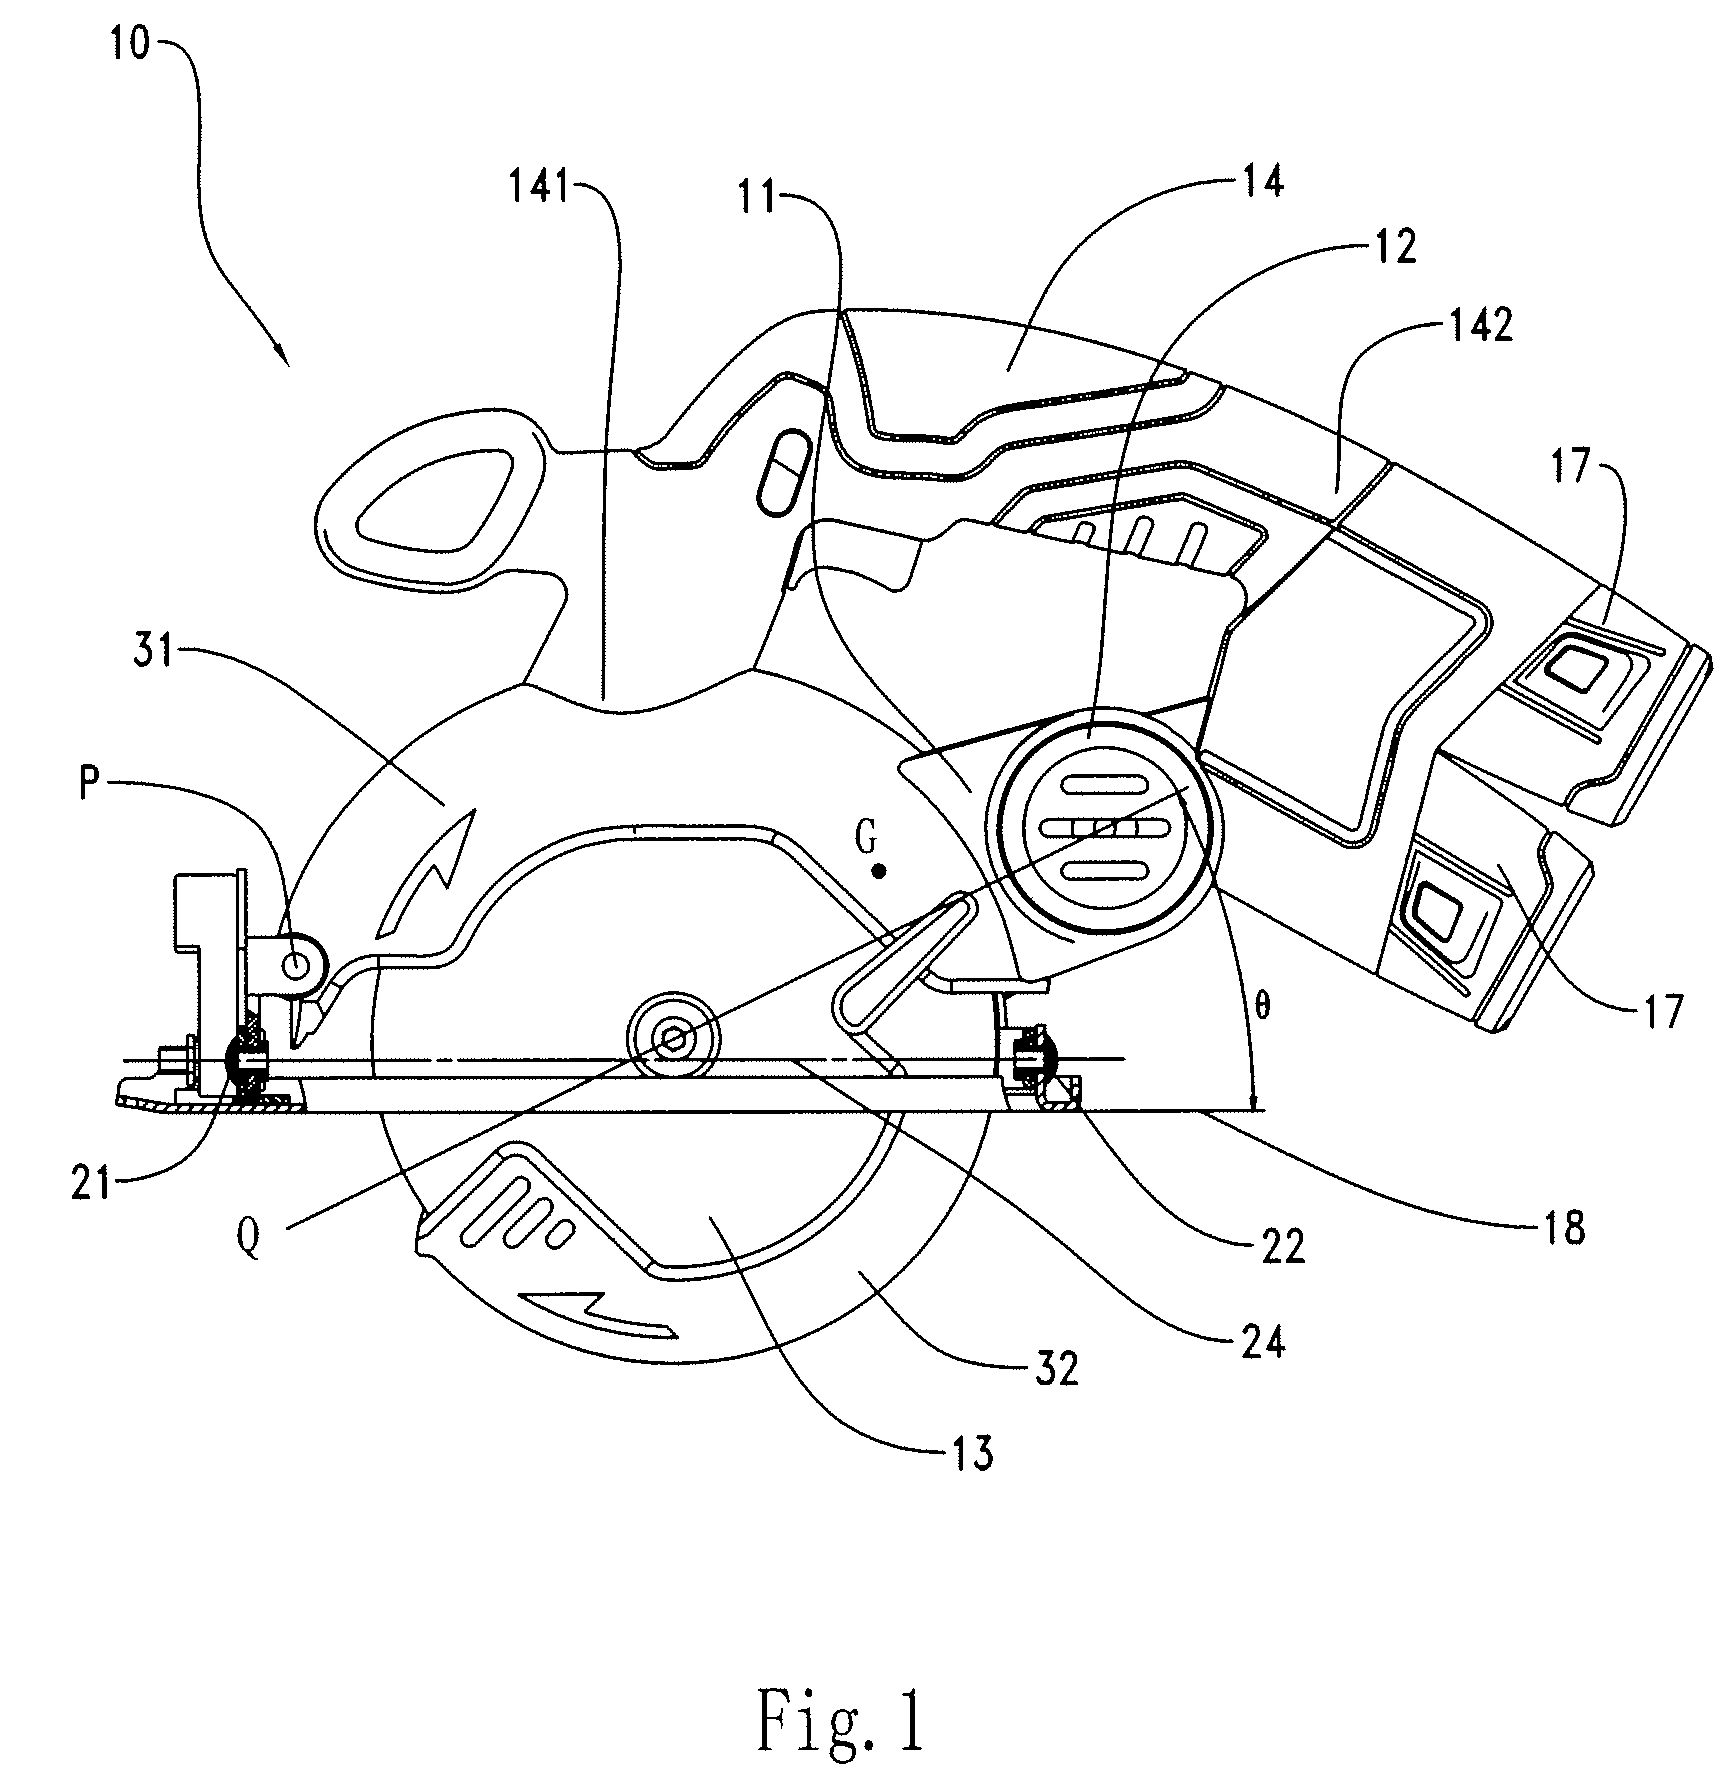 Circular saw having a direct current power supply